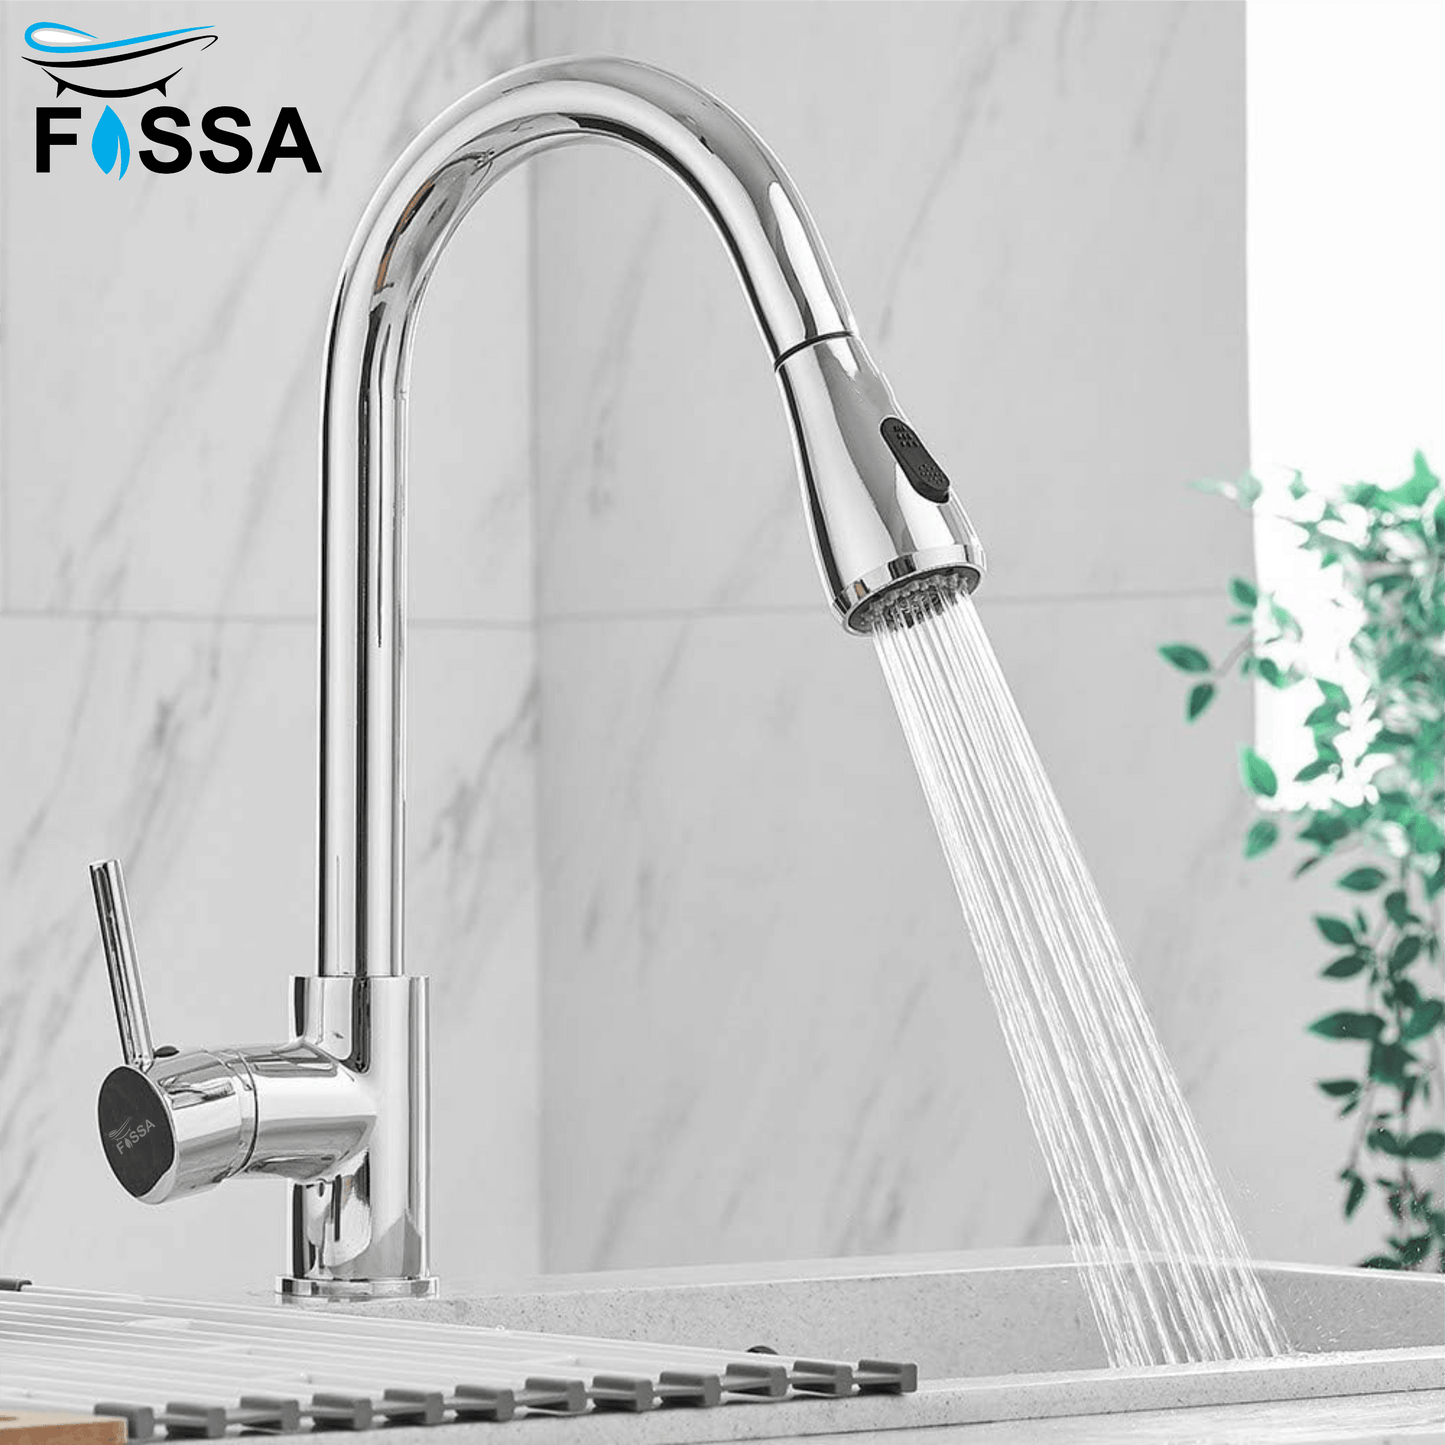 Fossa Kitchen Sink Mixer Tap with Pull Down Sprayer, Single Handle High Pull Out Kitchen Taps, Single Level Stainless Steel (Black Chrome) - Fossa Home 